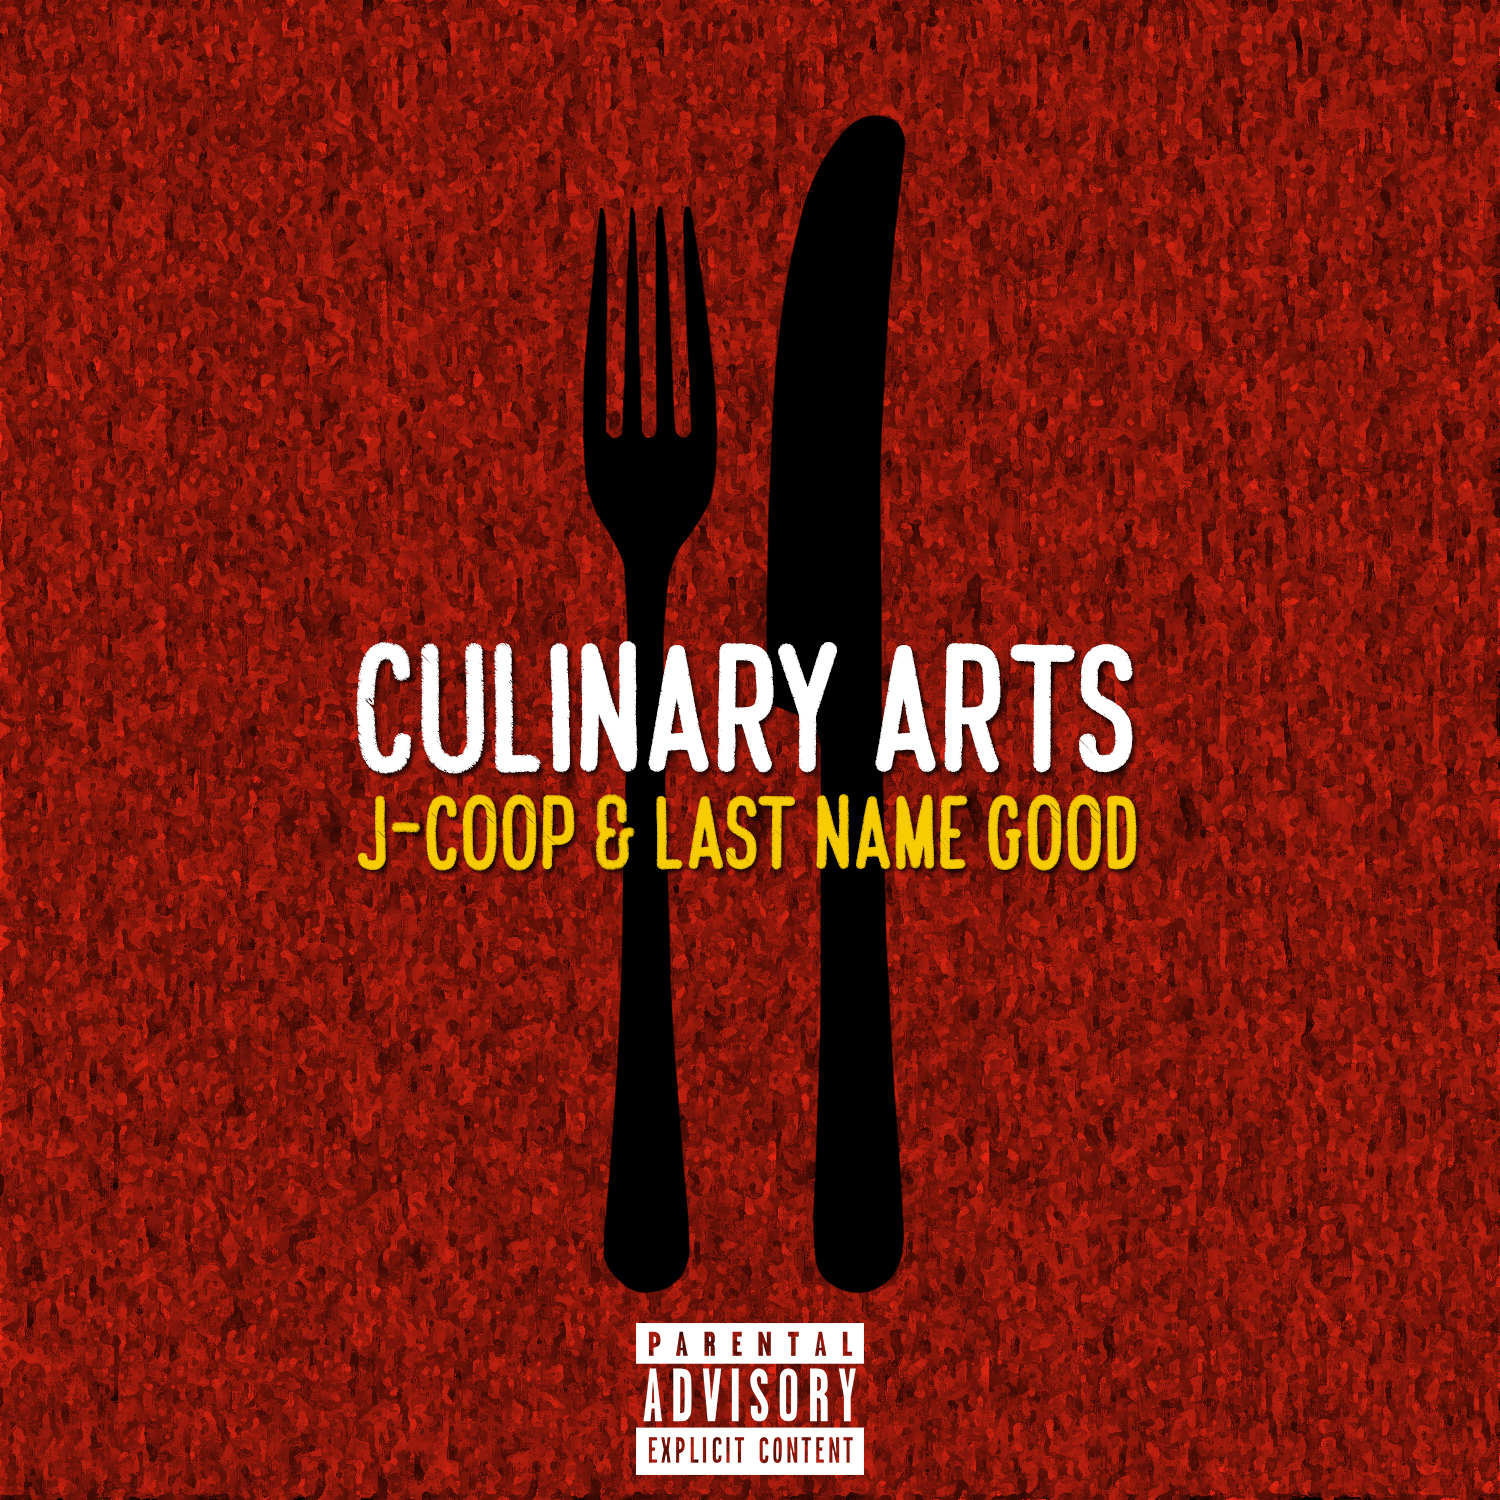 J-Coop & Last Name Good Serving 5 Star Dishes On “Culinary Arts”